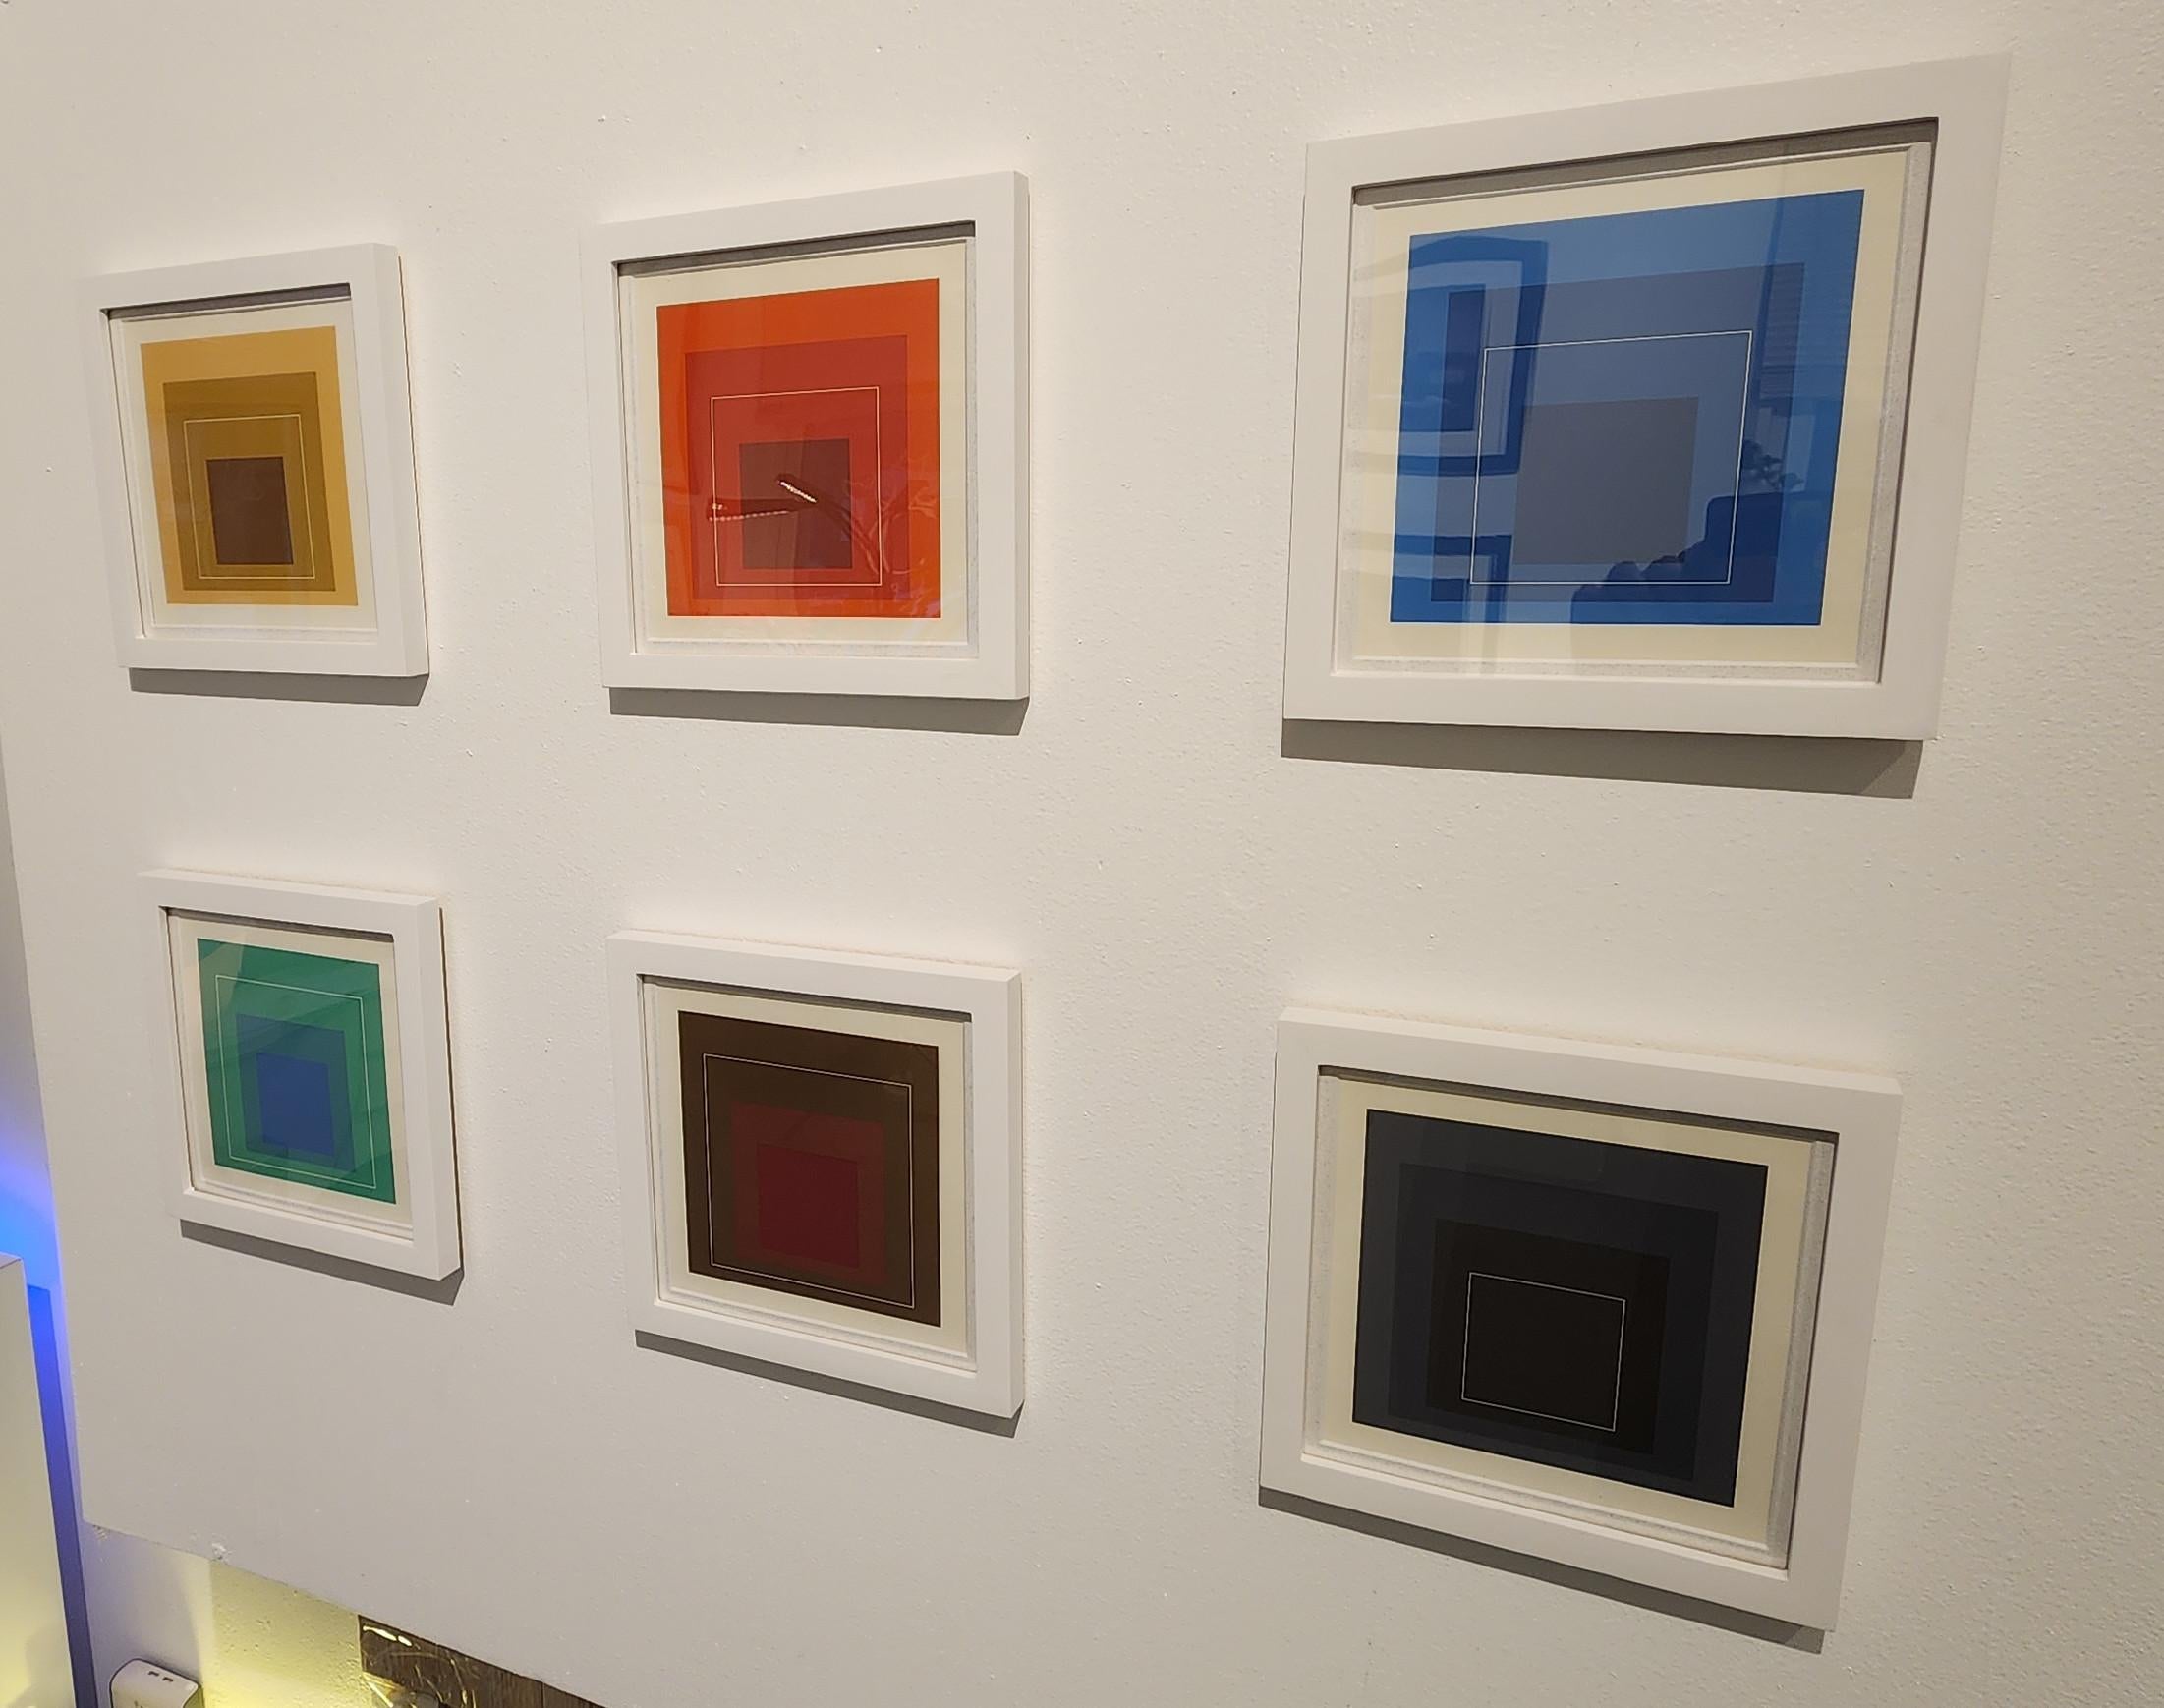 White Lines Squares - Set of Six (6) (Minimalism Bauhaus Homage Square ~50% OFF) - Minimalist Print by (after) Josef Albers